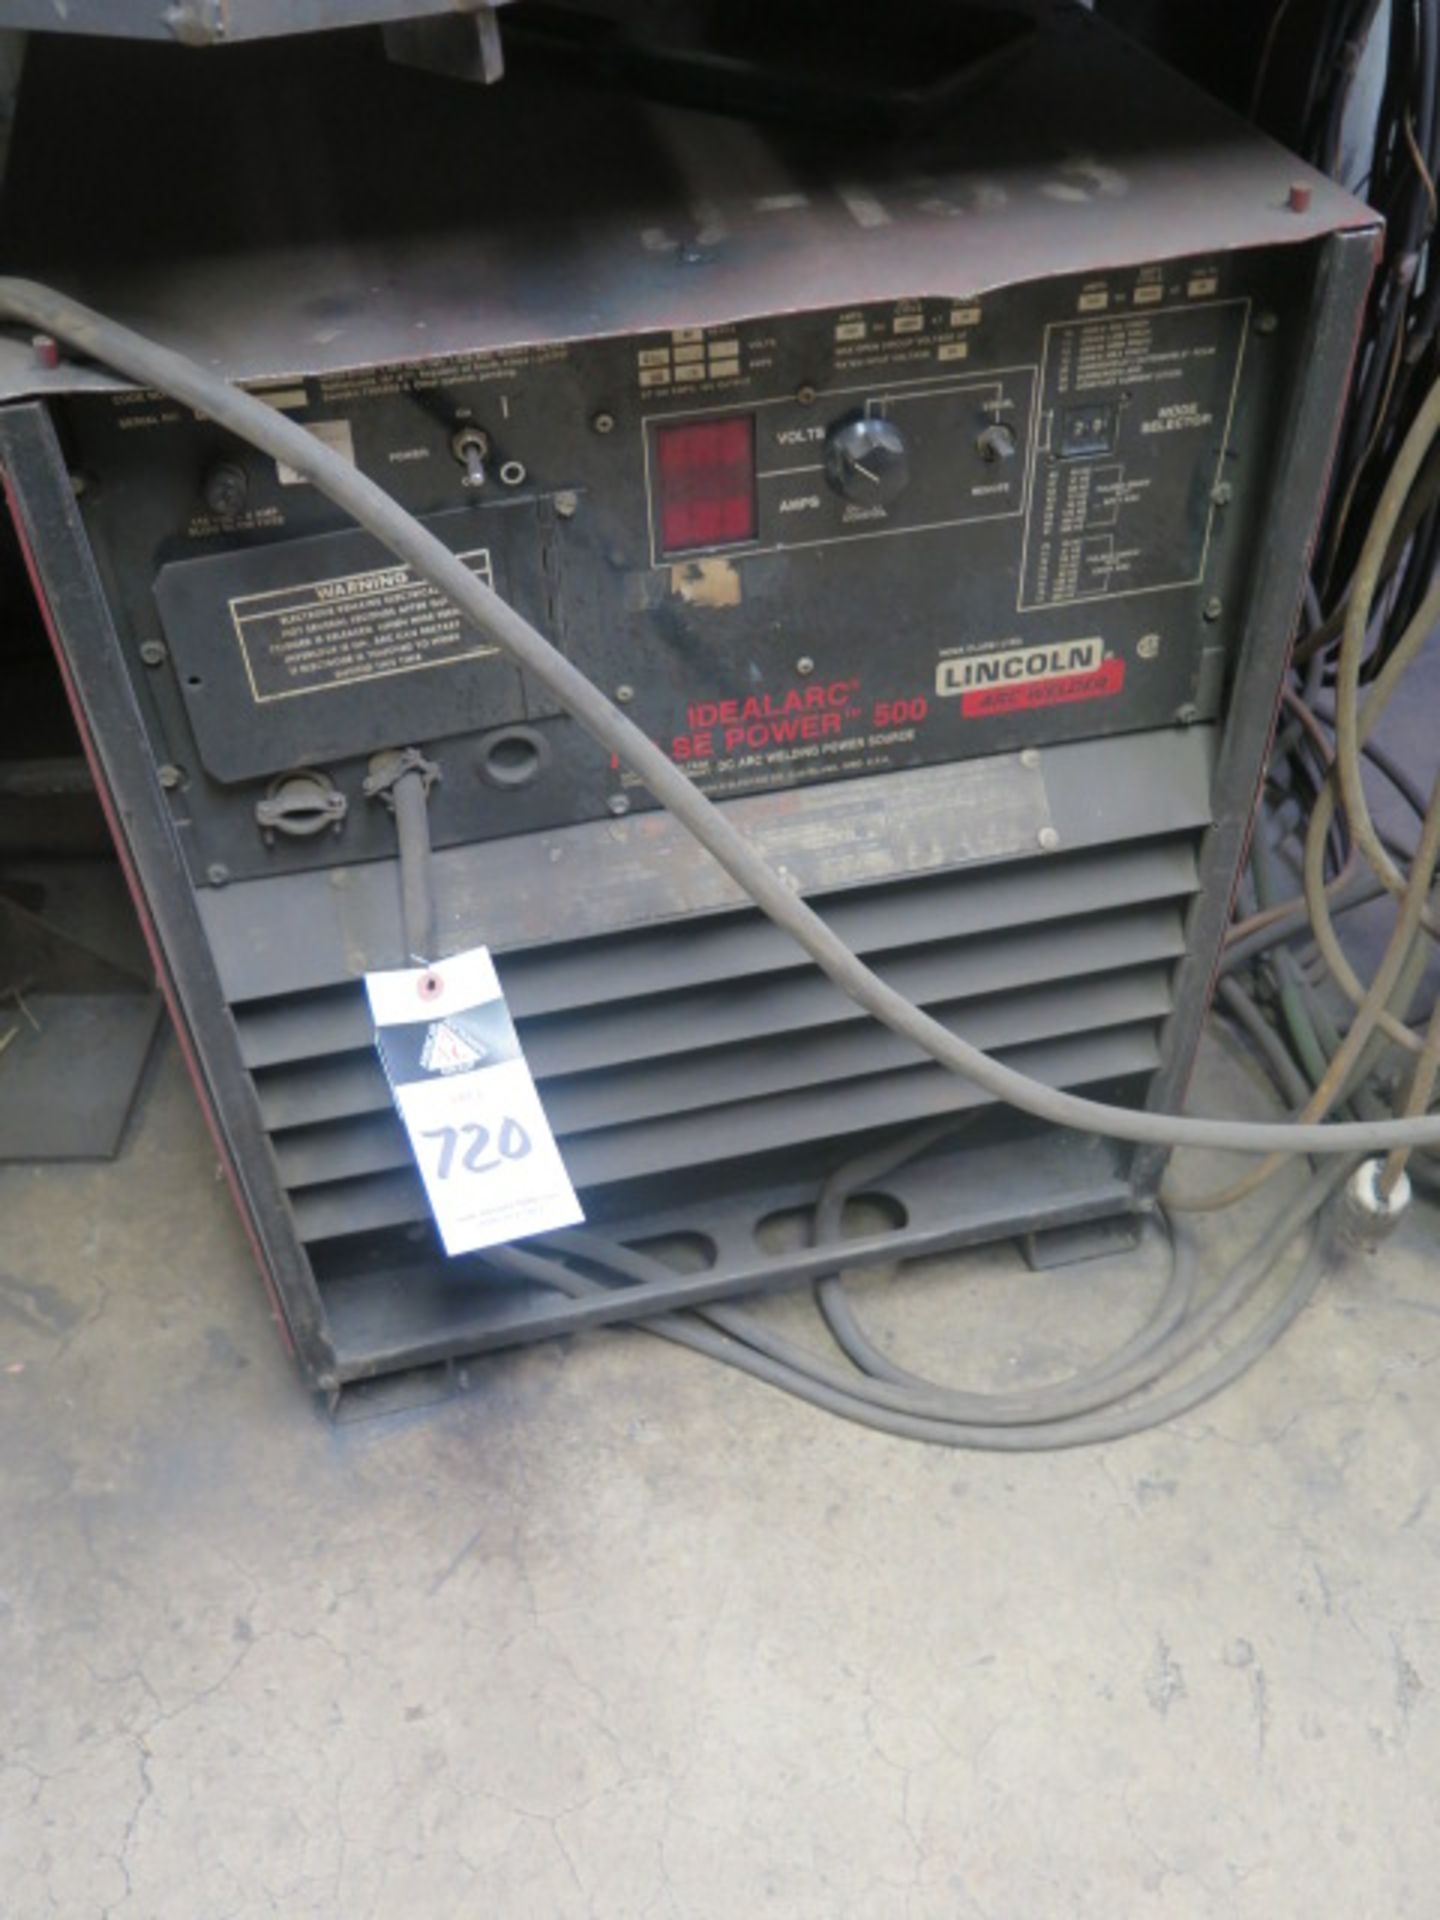 Lincoln Idealarc Power Pulse 500 CV-DC Arc Welding Power Source w/ Lincoln LN-7 Wire Feeder